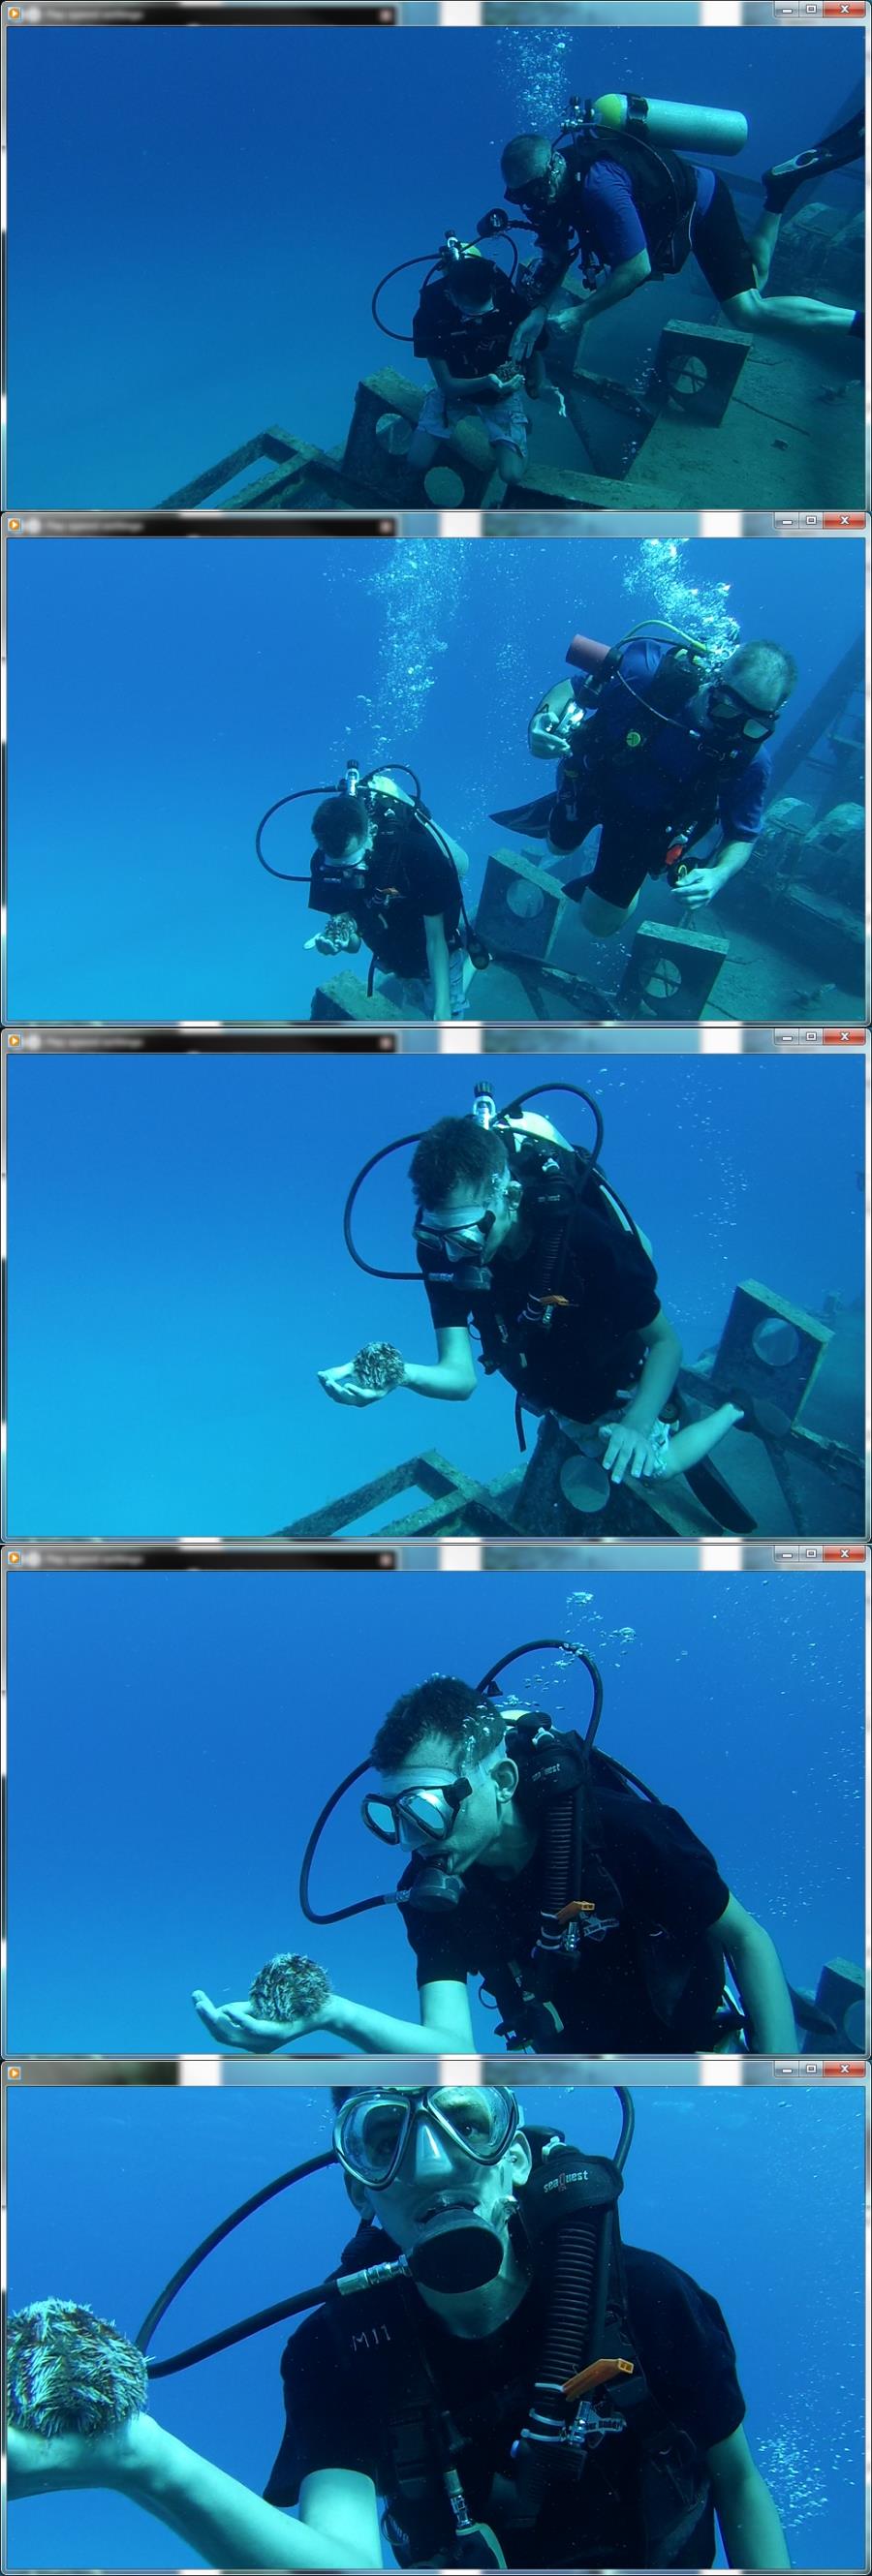 Chris with his new friend while diving the Kittiwake